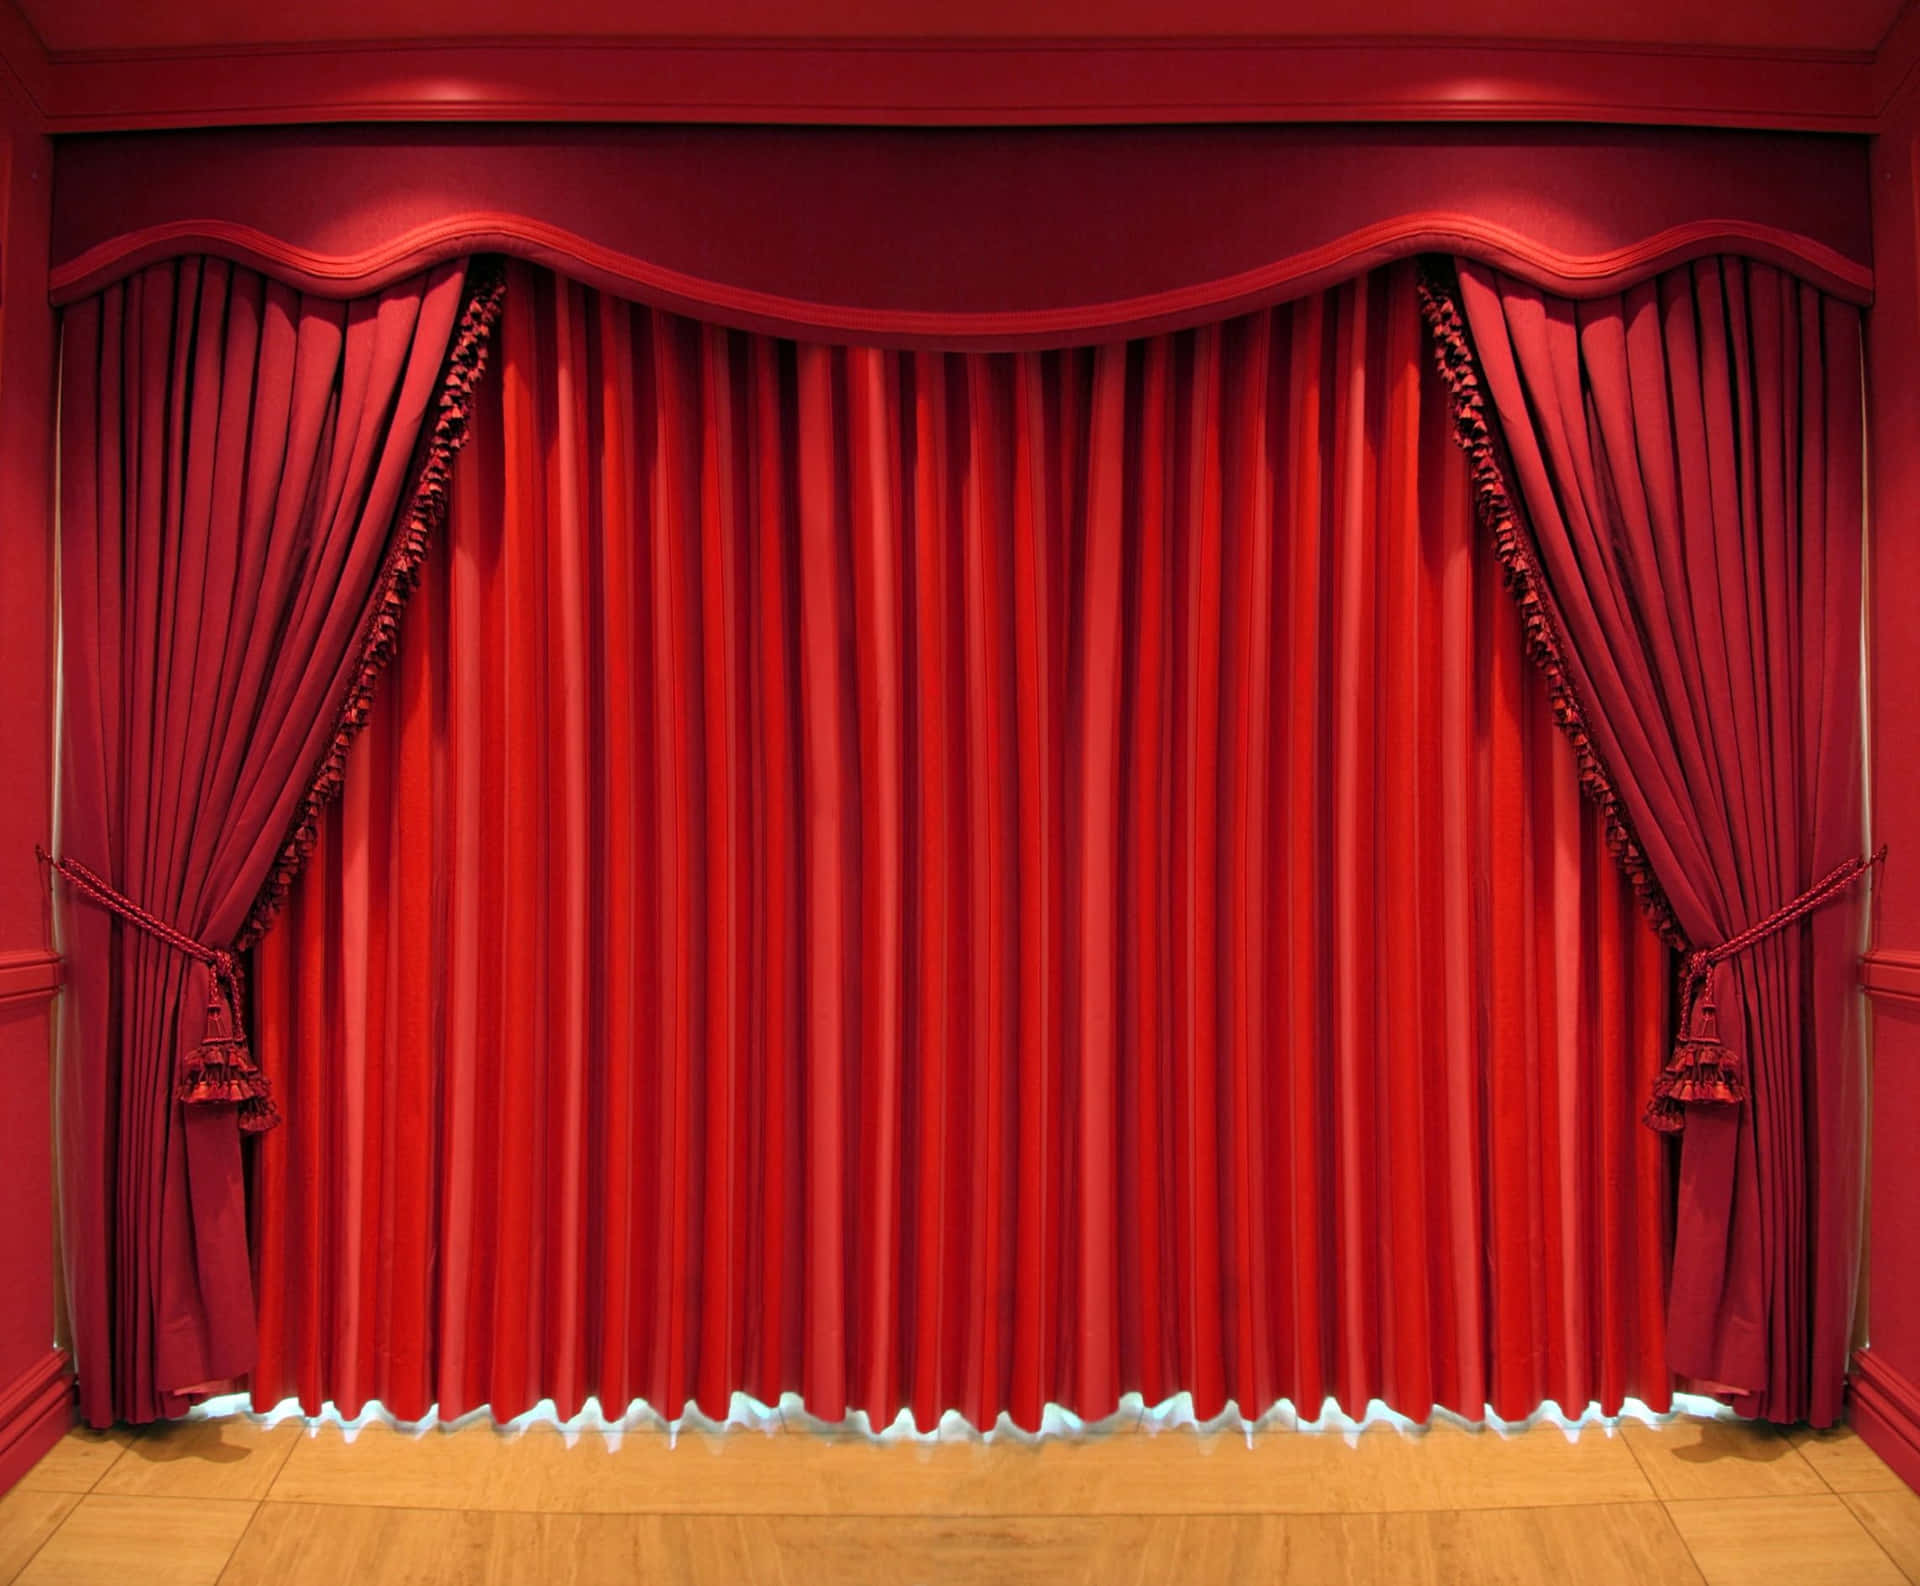 Red curtains open, revealing a scene of awe and wonder